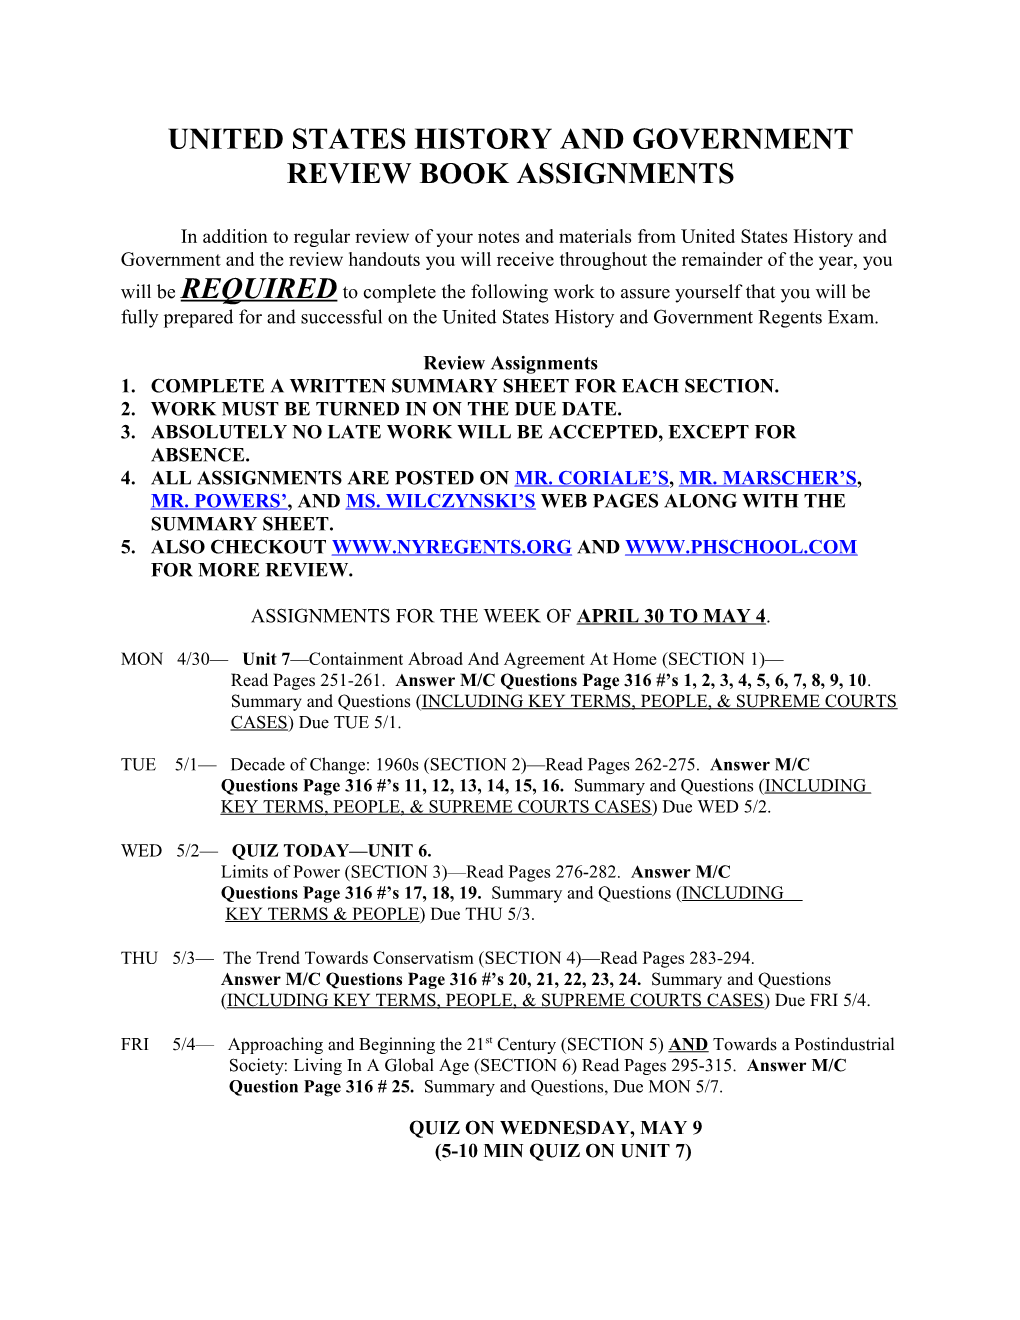 United States History and Government Review Book Assignments